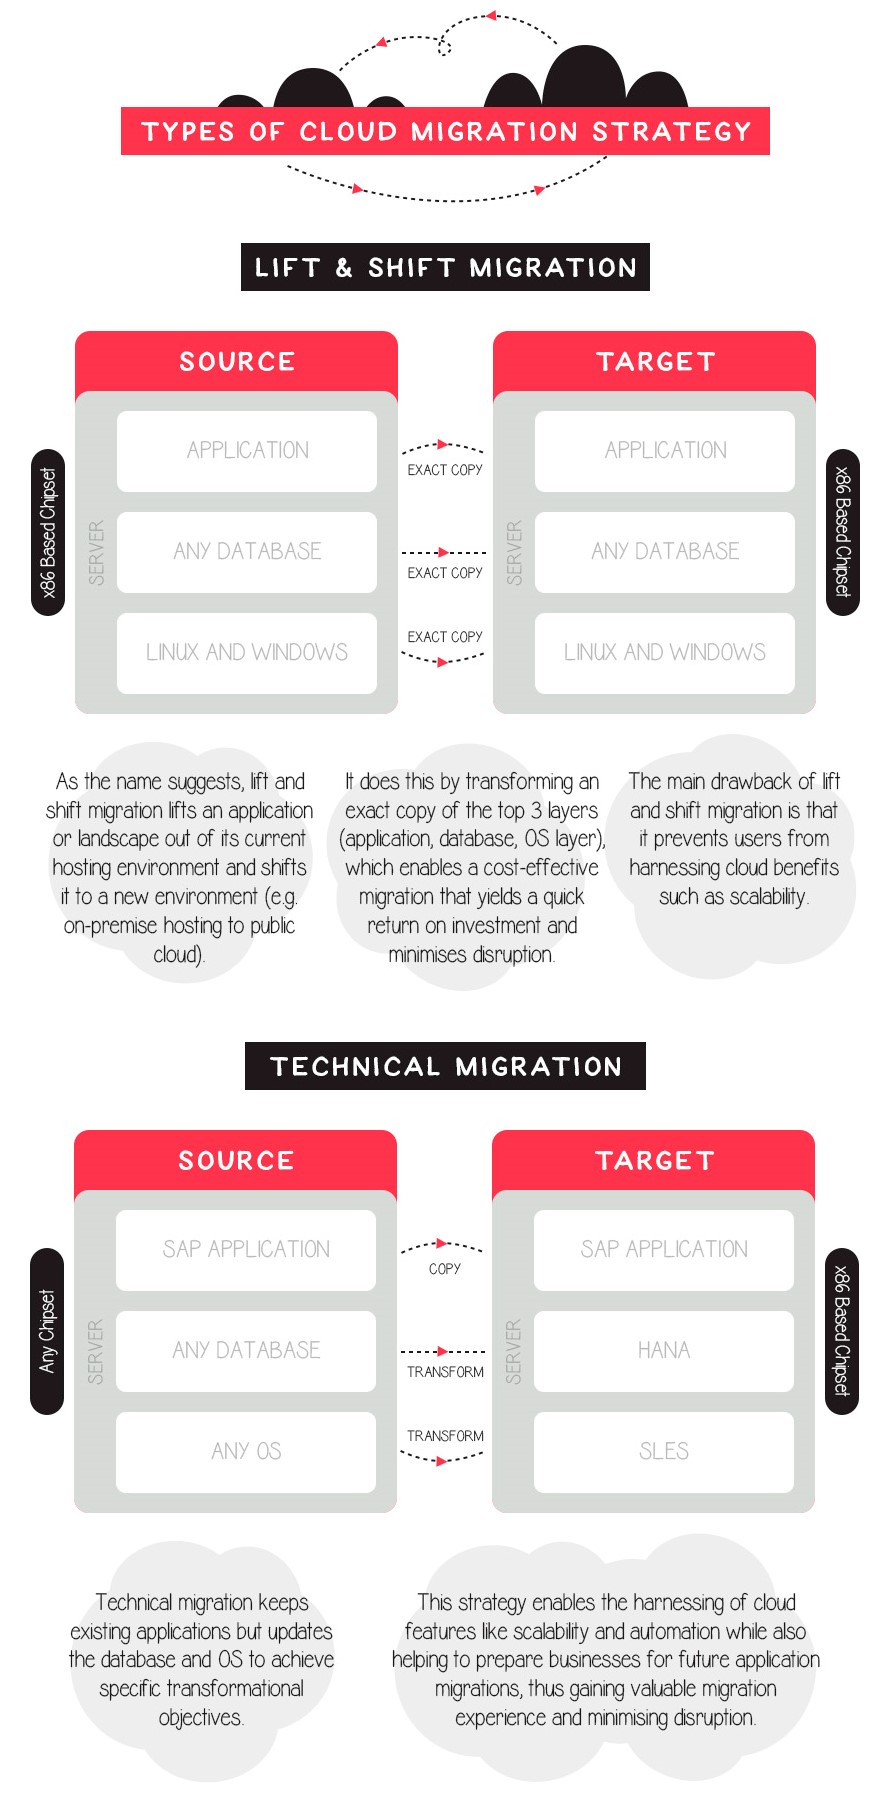 However, when it comes to starting a cloud migration, organizations have a hard time deciding what is best for them, what’s the difference between multiple cloud strategies, and what is the most effective one. Fortunately, ERS IT SOLUTIONS answered all these questions in the infographic below.